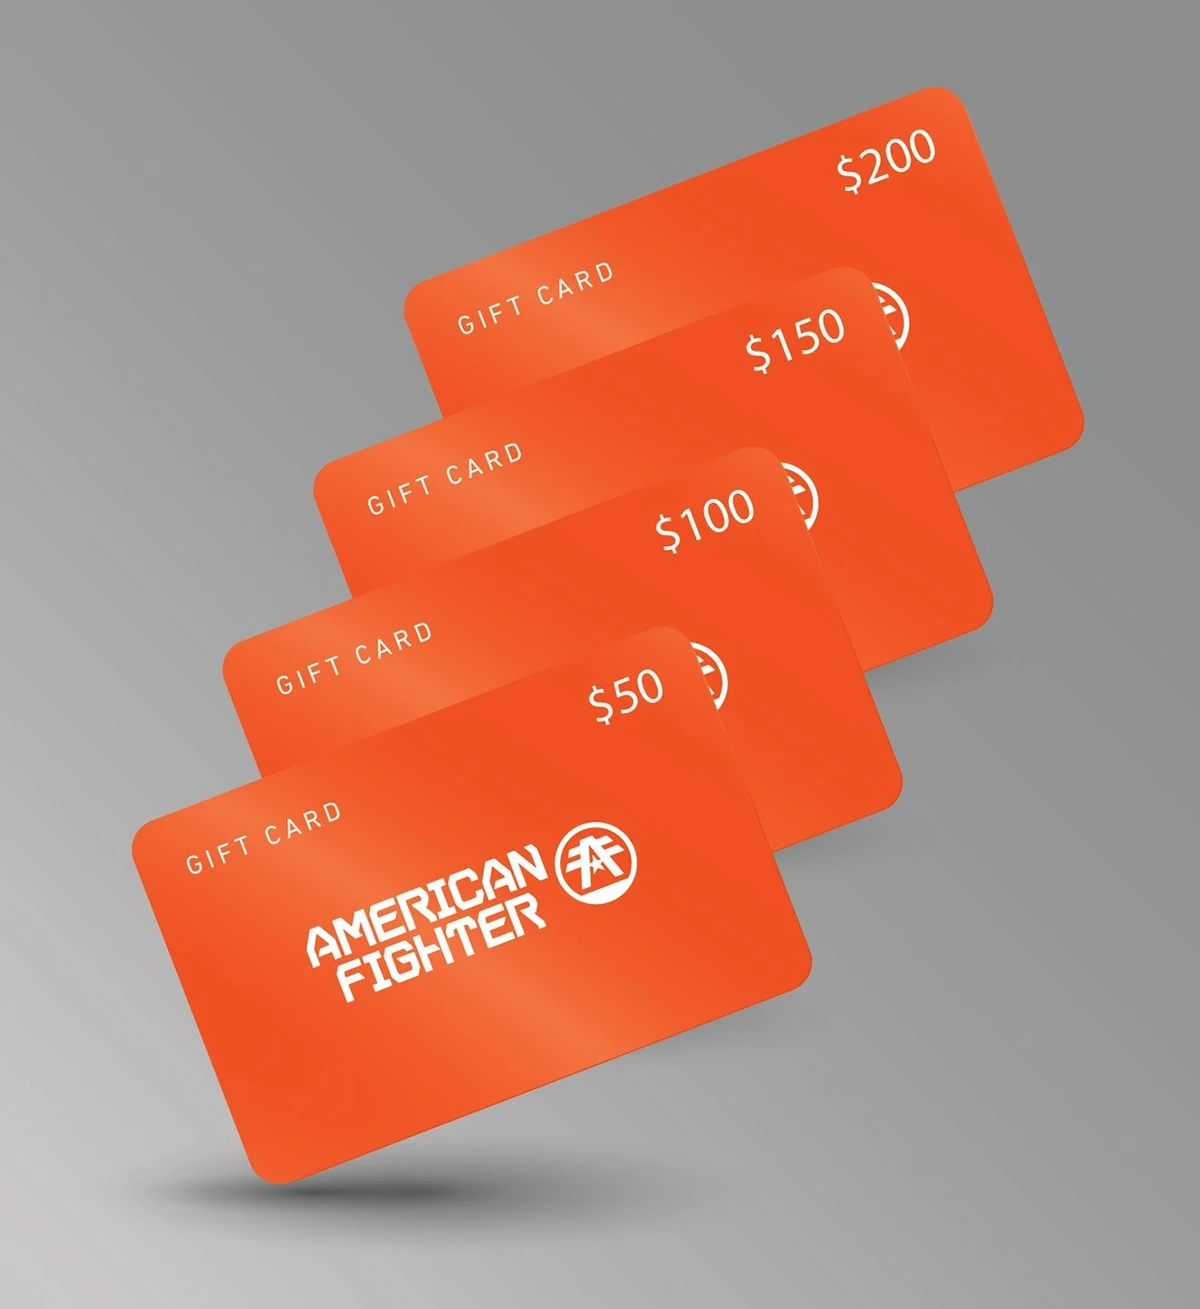 American Fighter Gift Cards